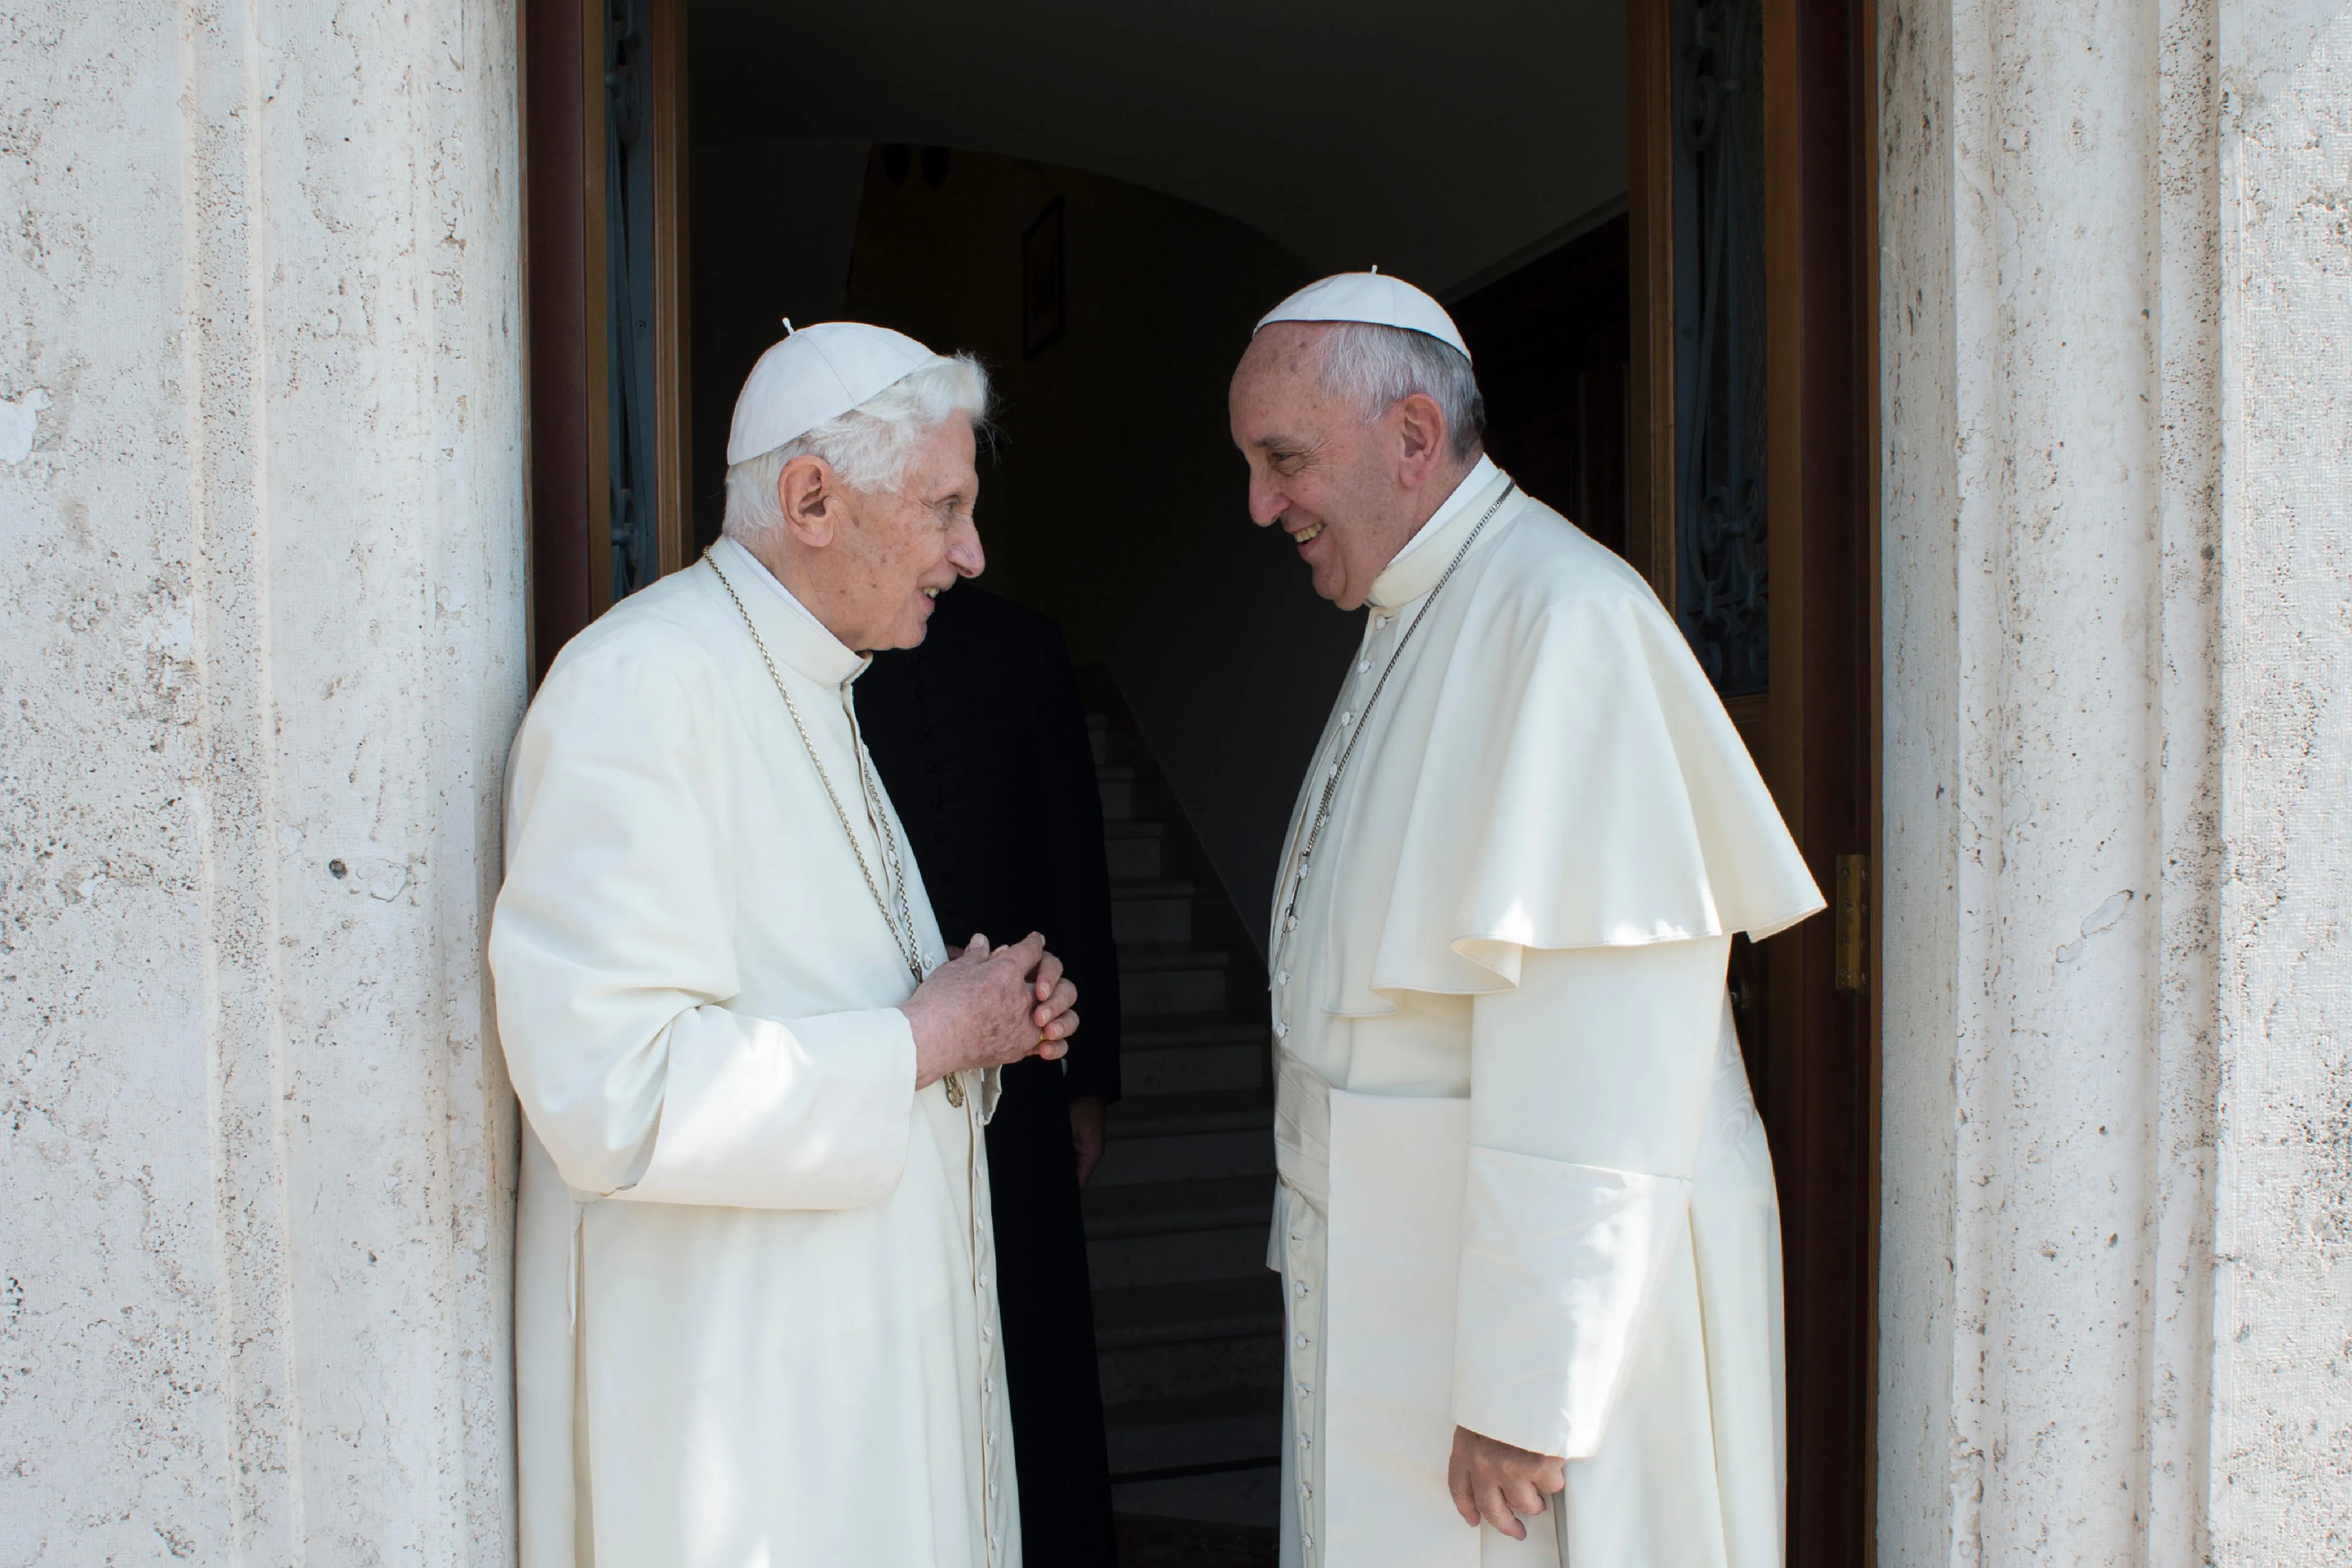 Pope Francis visits Pope Emeritus Benedict XVI at the Mater Ecclesiae monastery in Vatican City to exchange Christmas greetings Dec. 23, 2013.?w=200&h=150